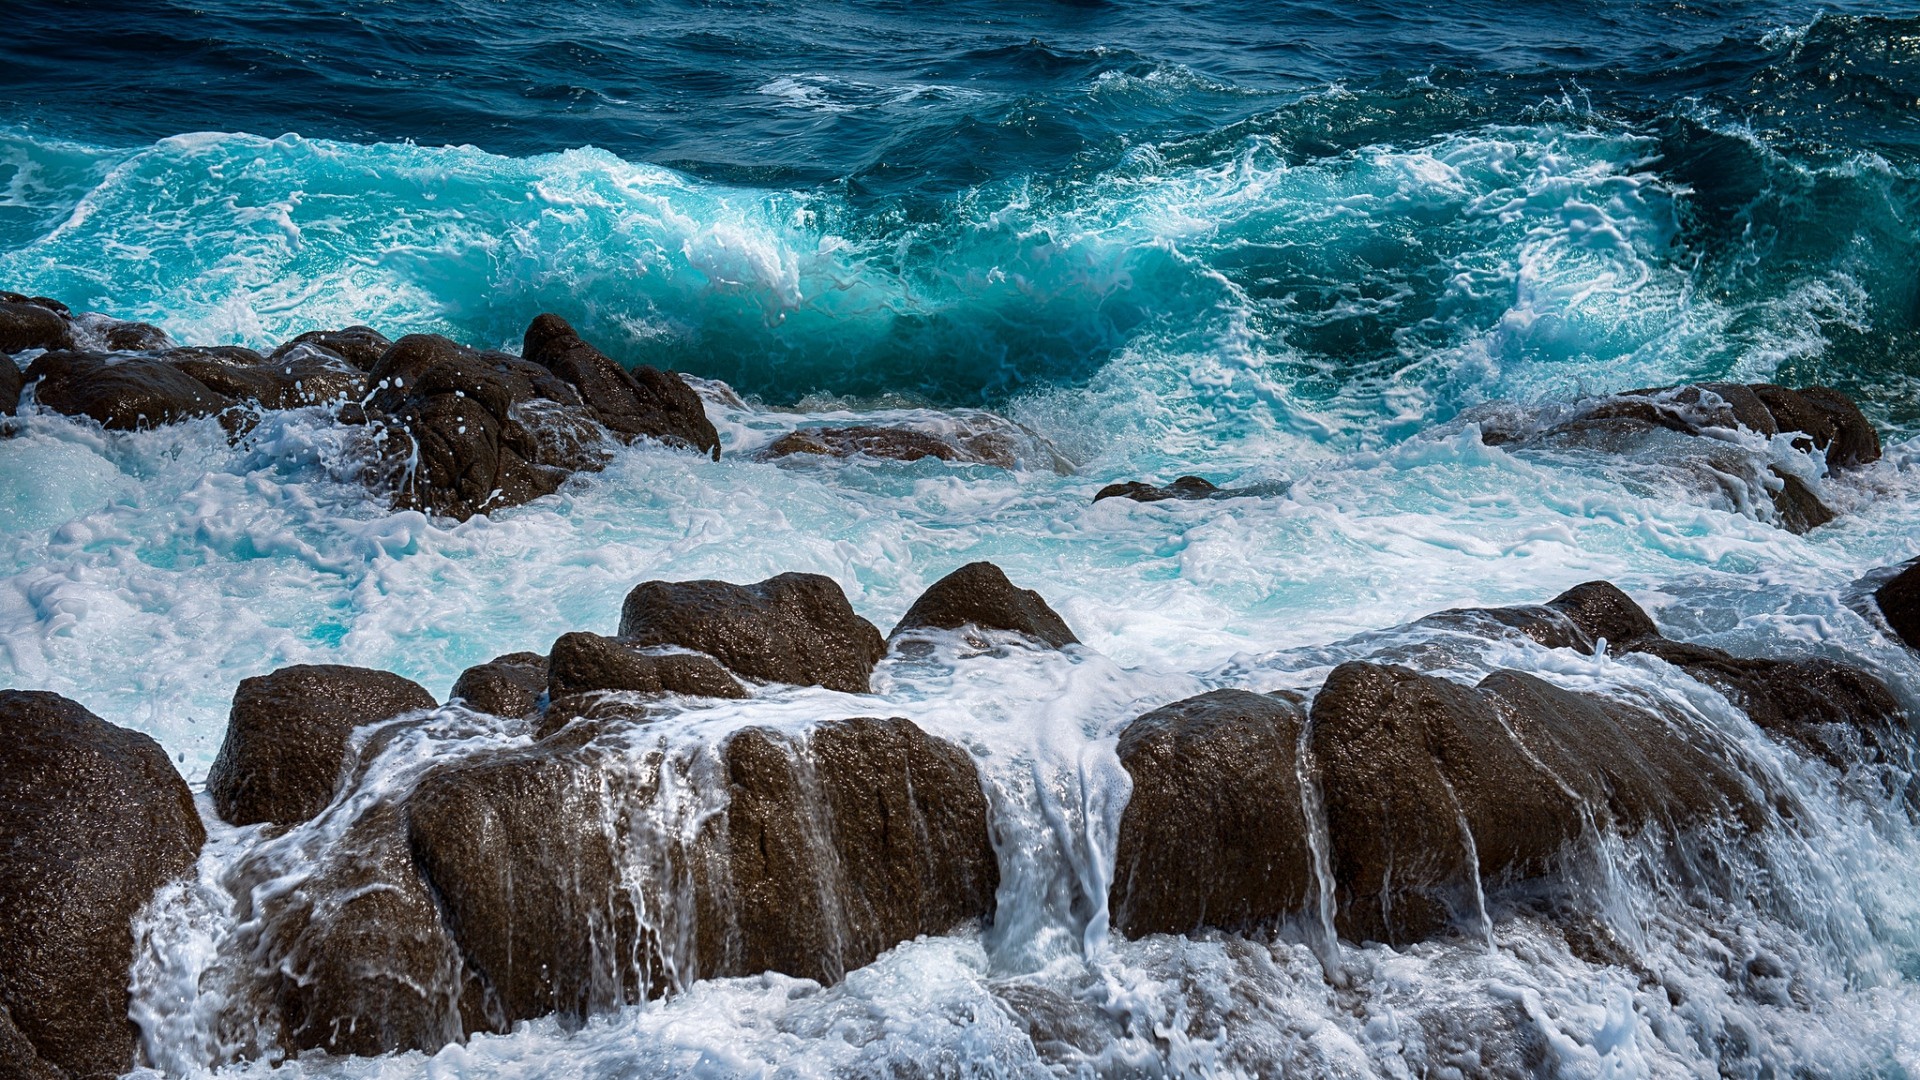 General 1920x1080 waves nature water stones